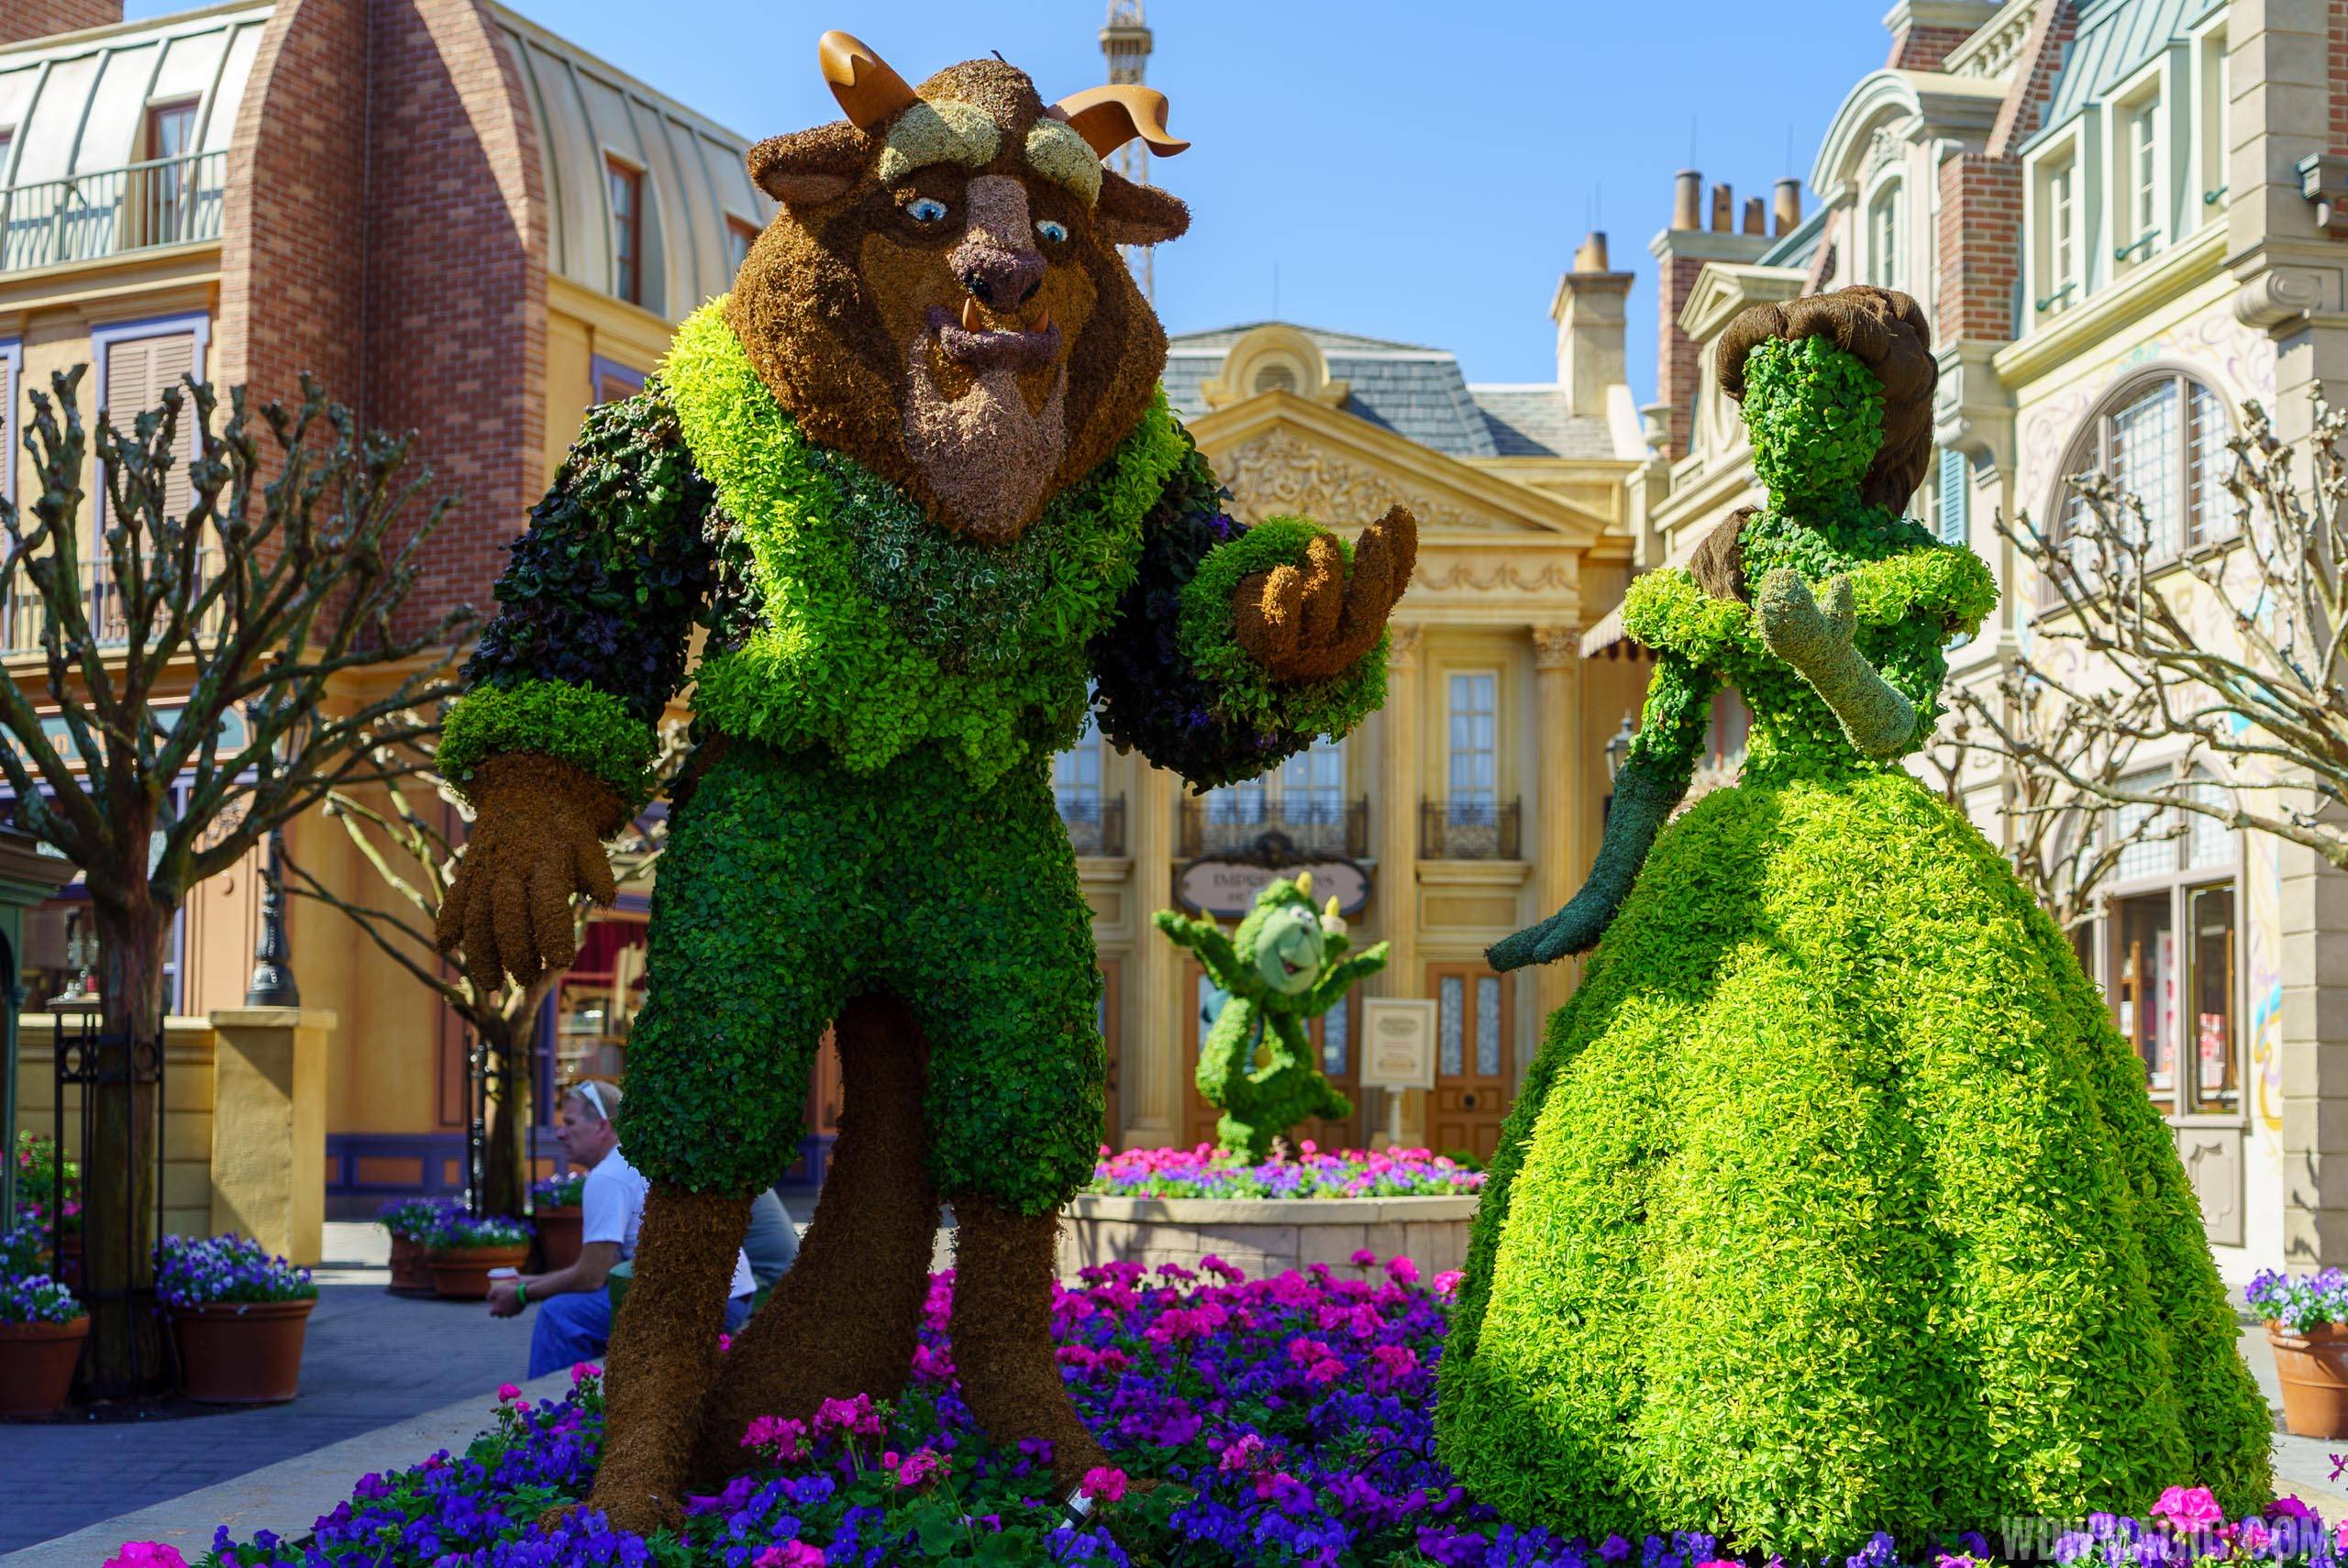 2016 Epcot International Flower and Garden Festival - Beauty and the Beast topiaries